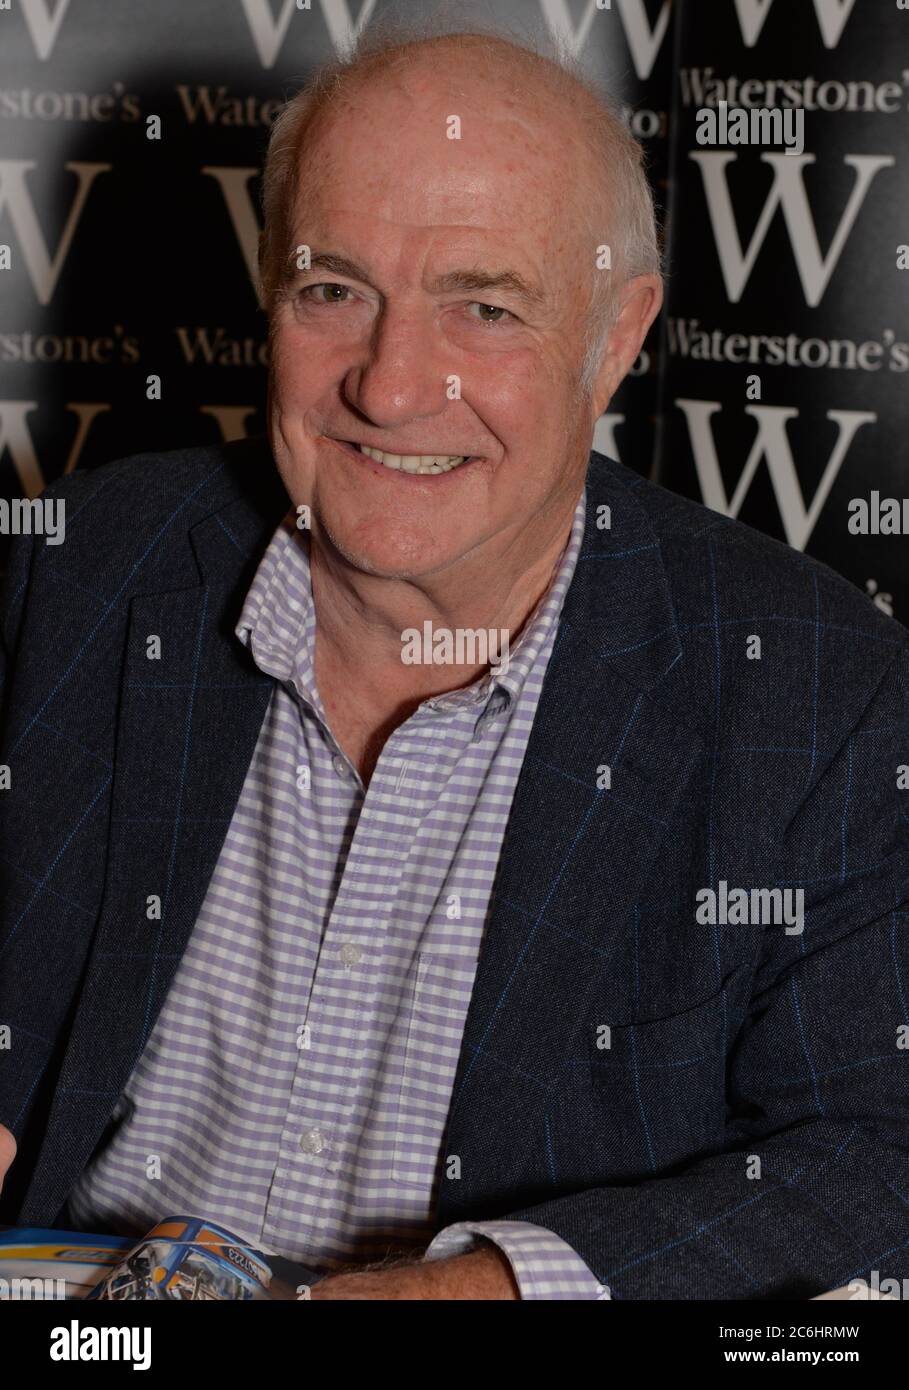 Rick Stein, British chef, restaurateur and presenter signs copies of Rick Stein's Secret France, a collection of 120 new recipes for real and simple F Stock Photo